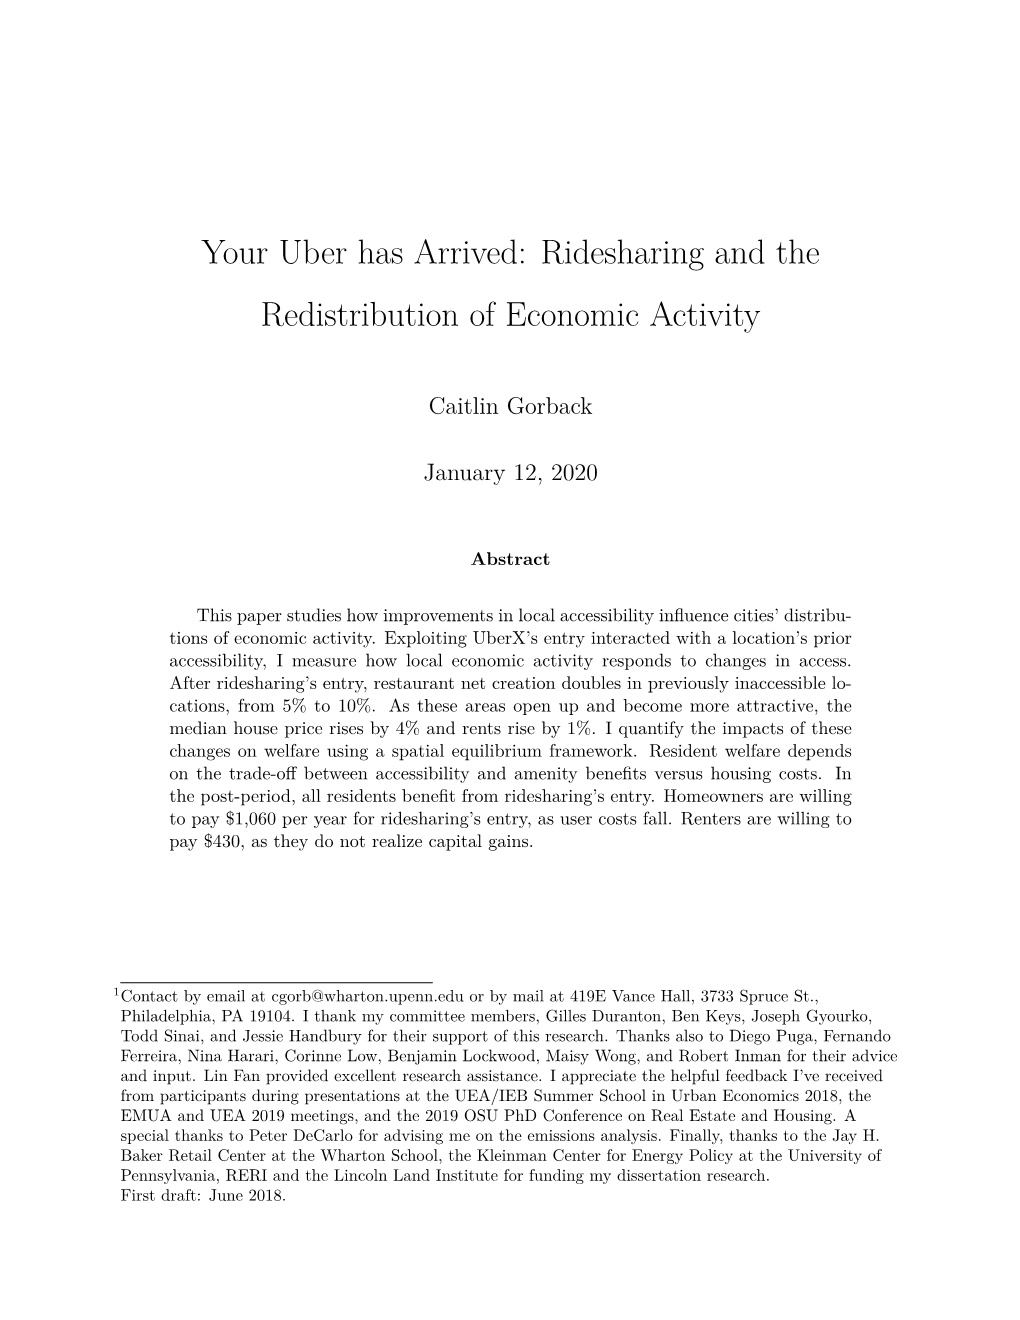 Your Uber Has Arrived: Ridesharing and the Redistribution of Economic Activity